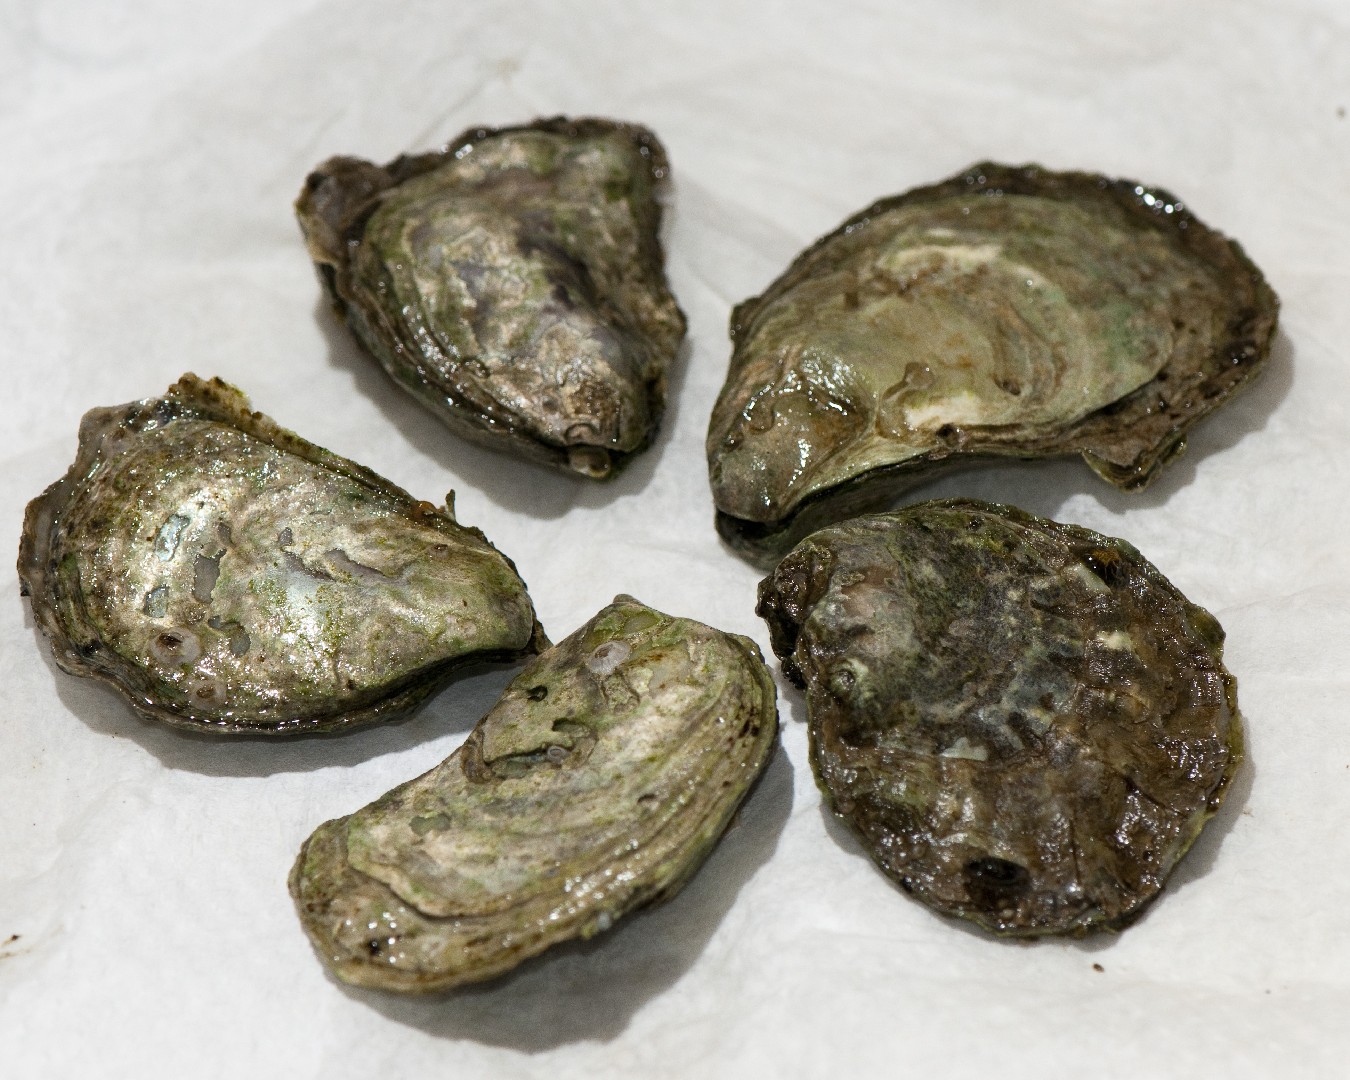 Oysters (Ostrea)